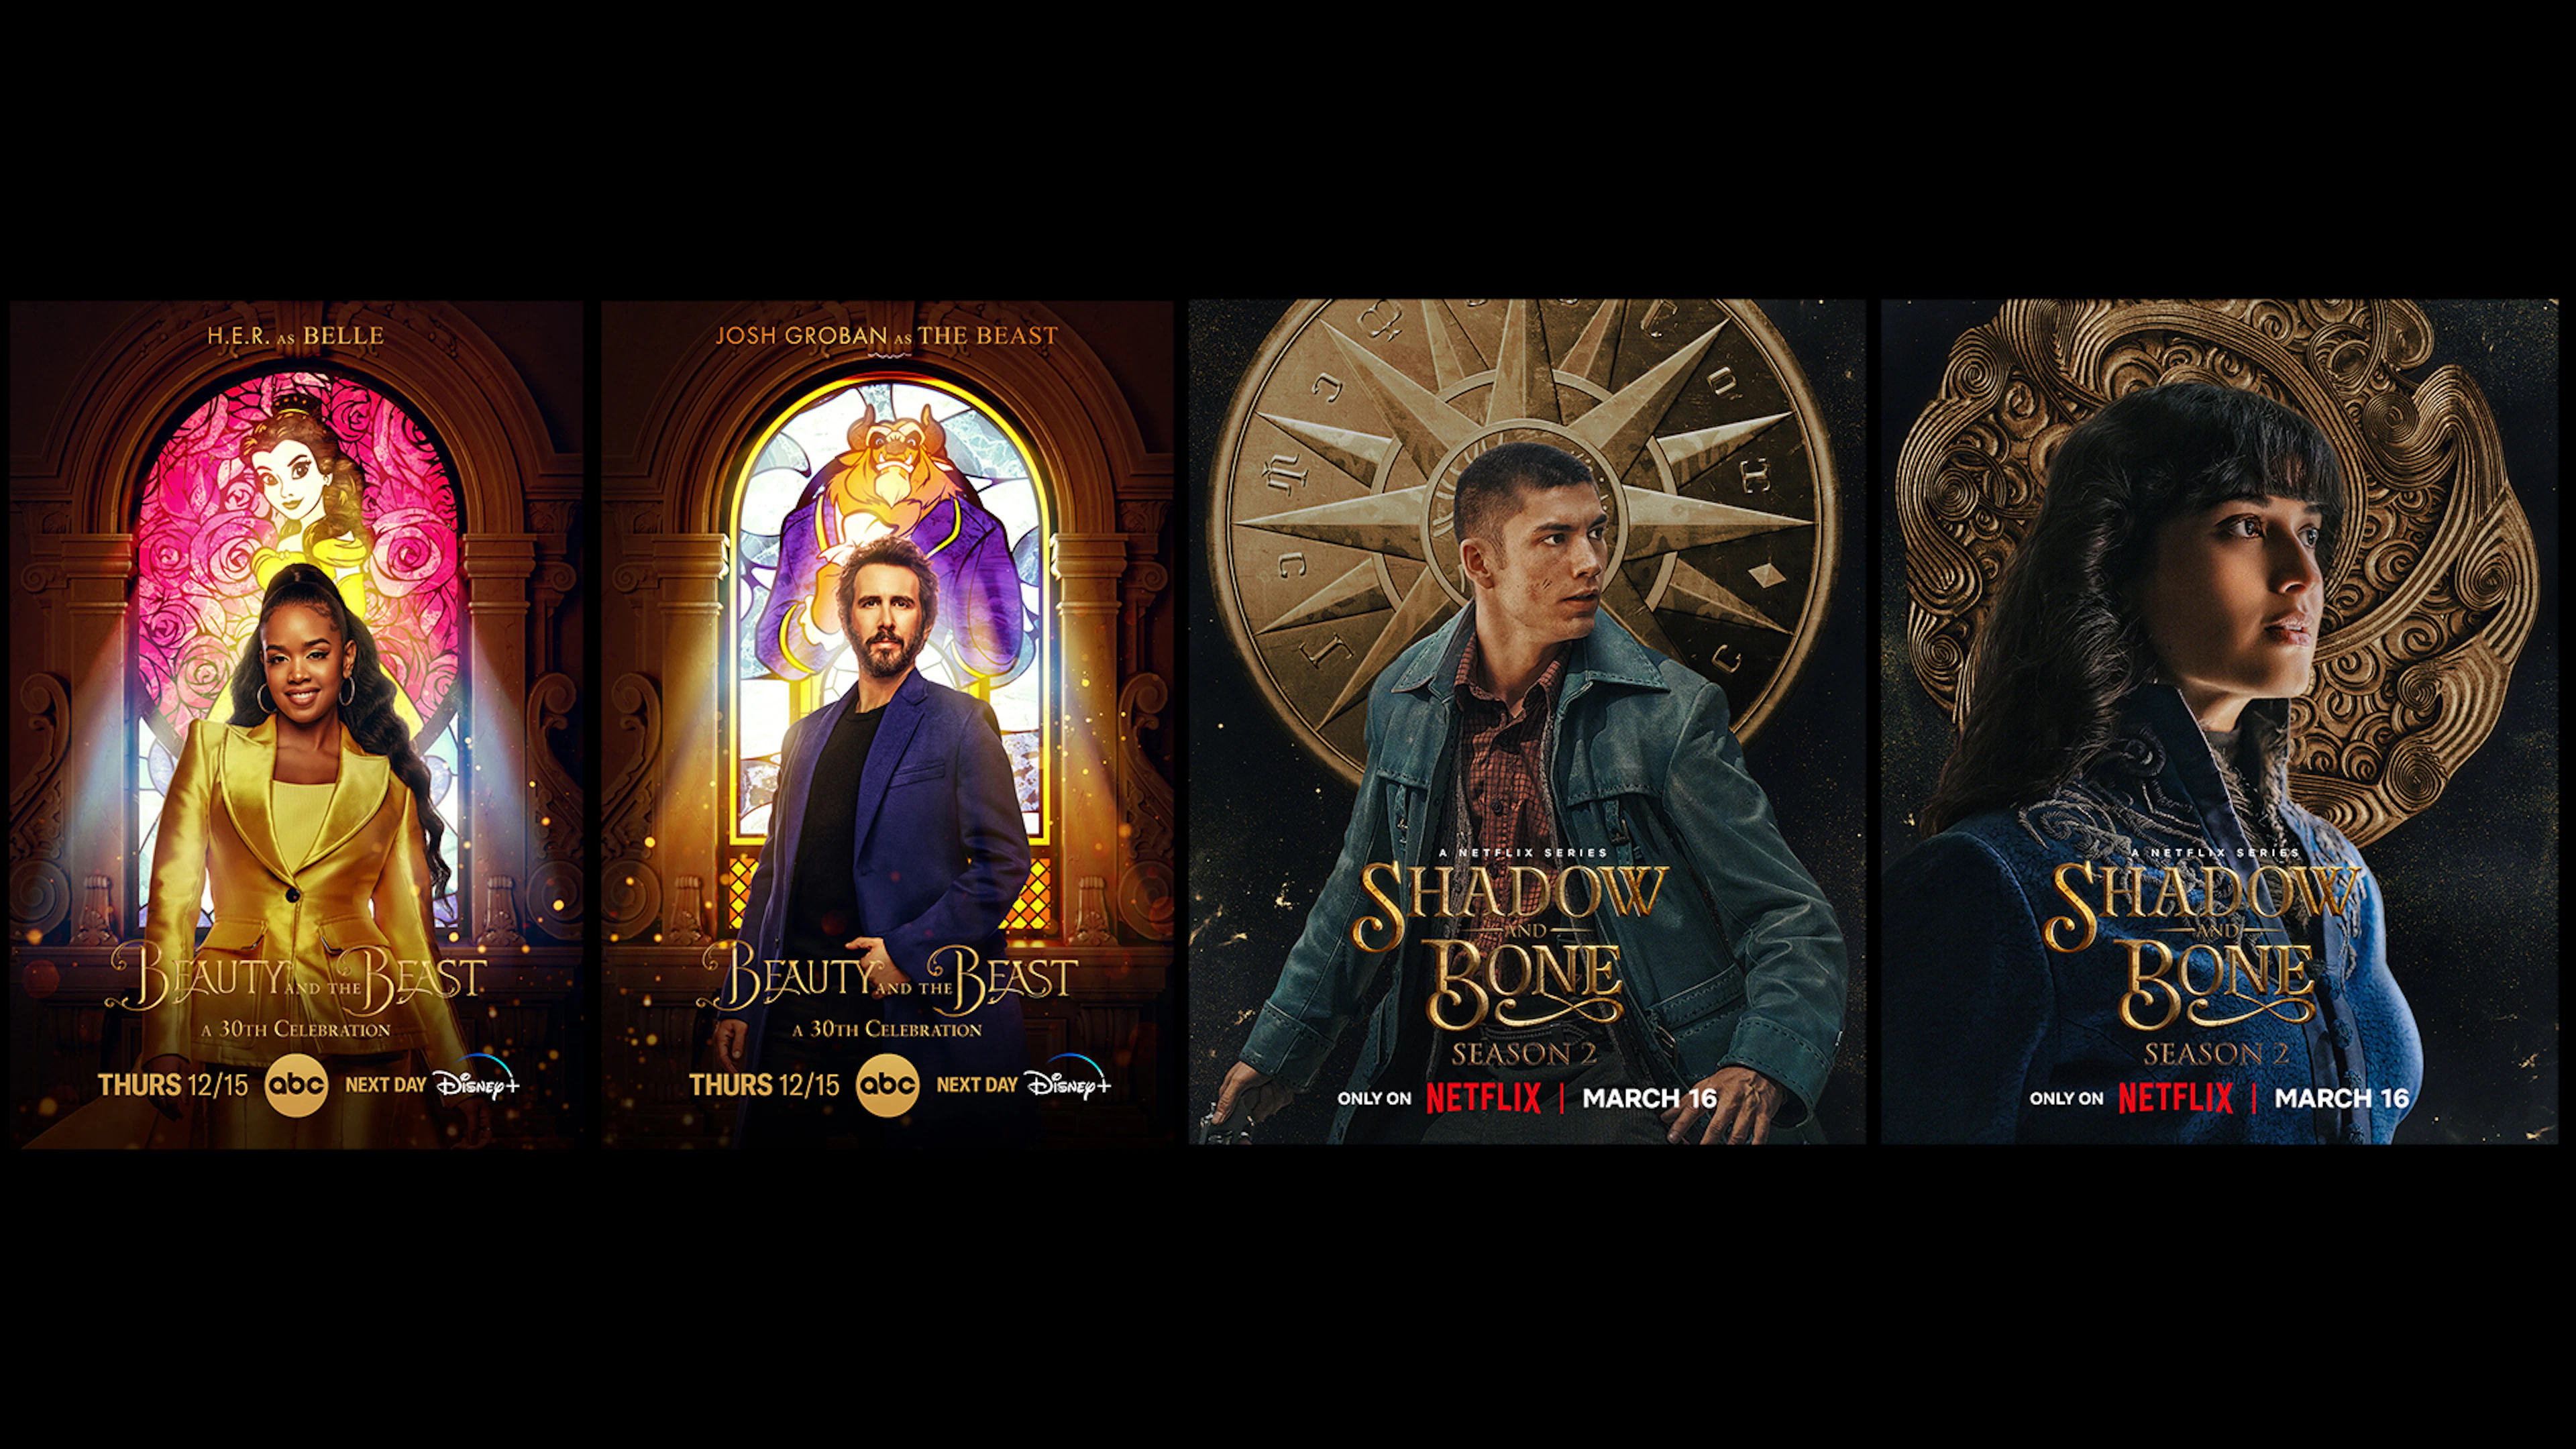 https://maxonassets.imgix.net/images/News/20231218_Using-Maxon-One-to-Create-Poster-for-Netflix-and-Disney-by-Mondlicht-Studio-01.png?fm=webp&auto=format,compress&w=3840&h=2160&ar=16:9&fit=clip&crop=faces&q=80